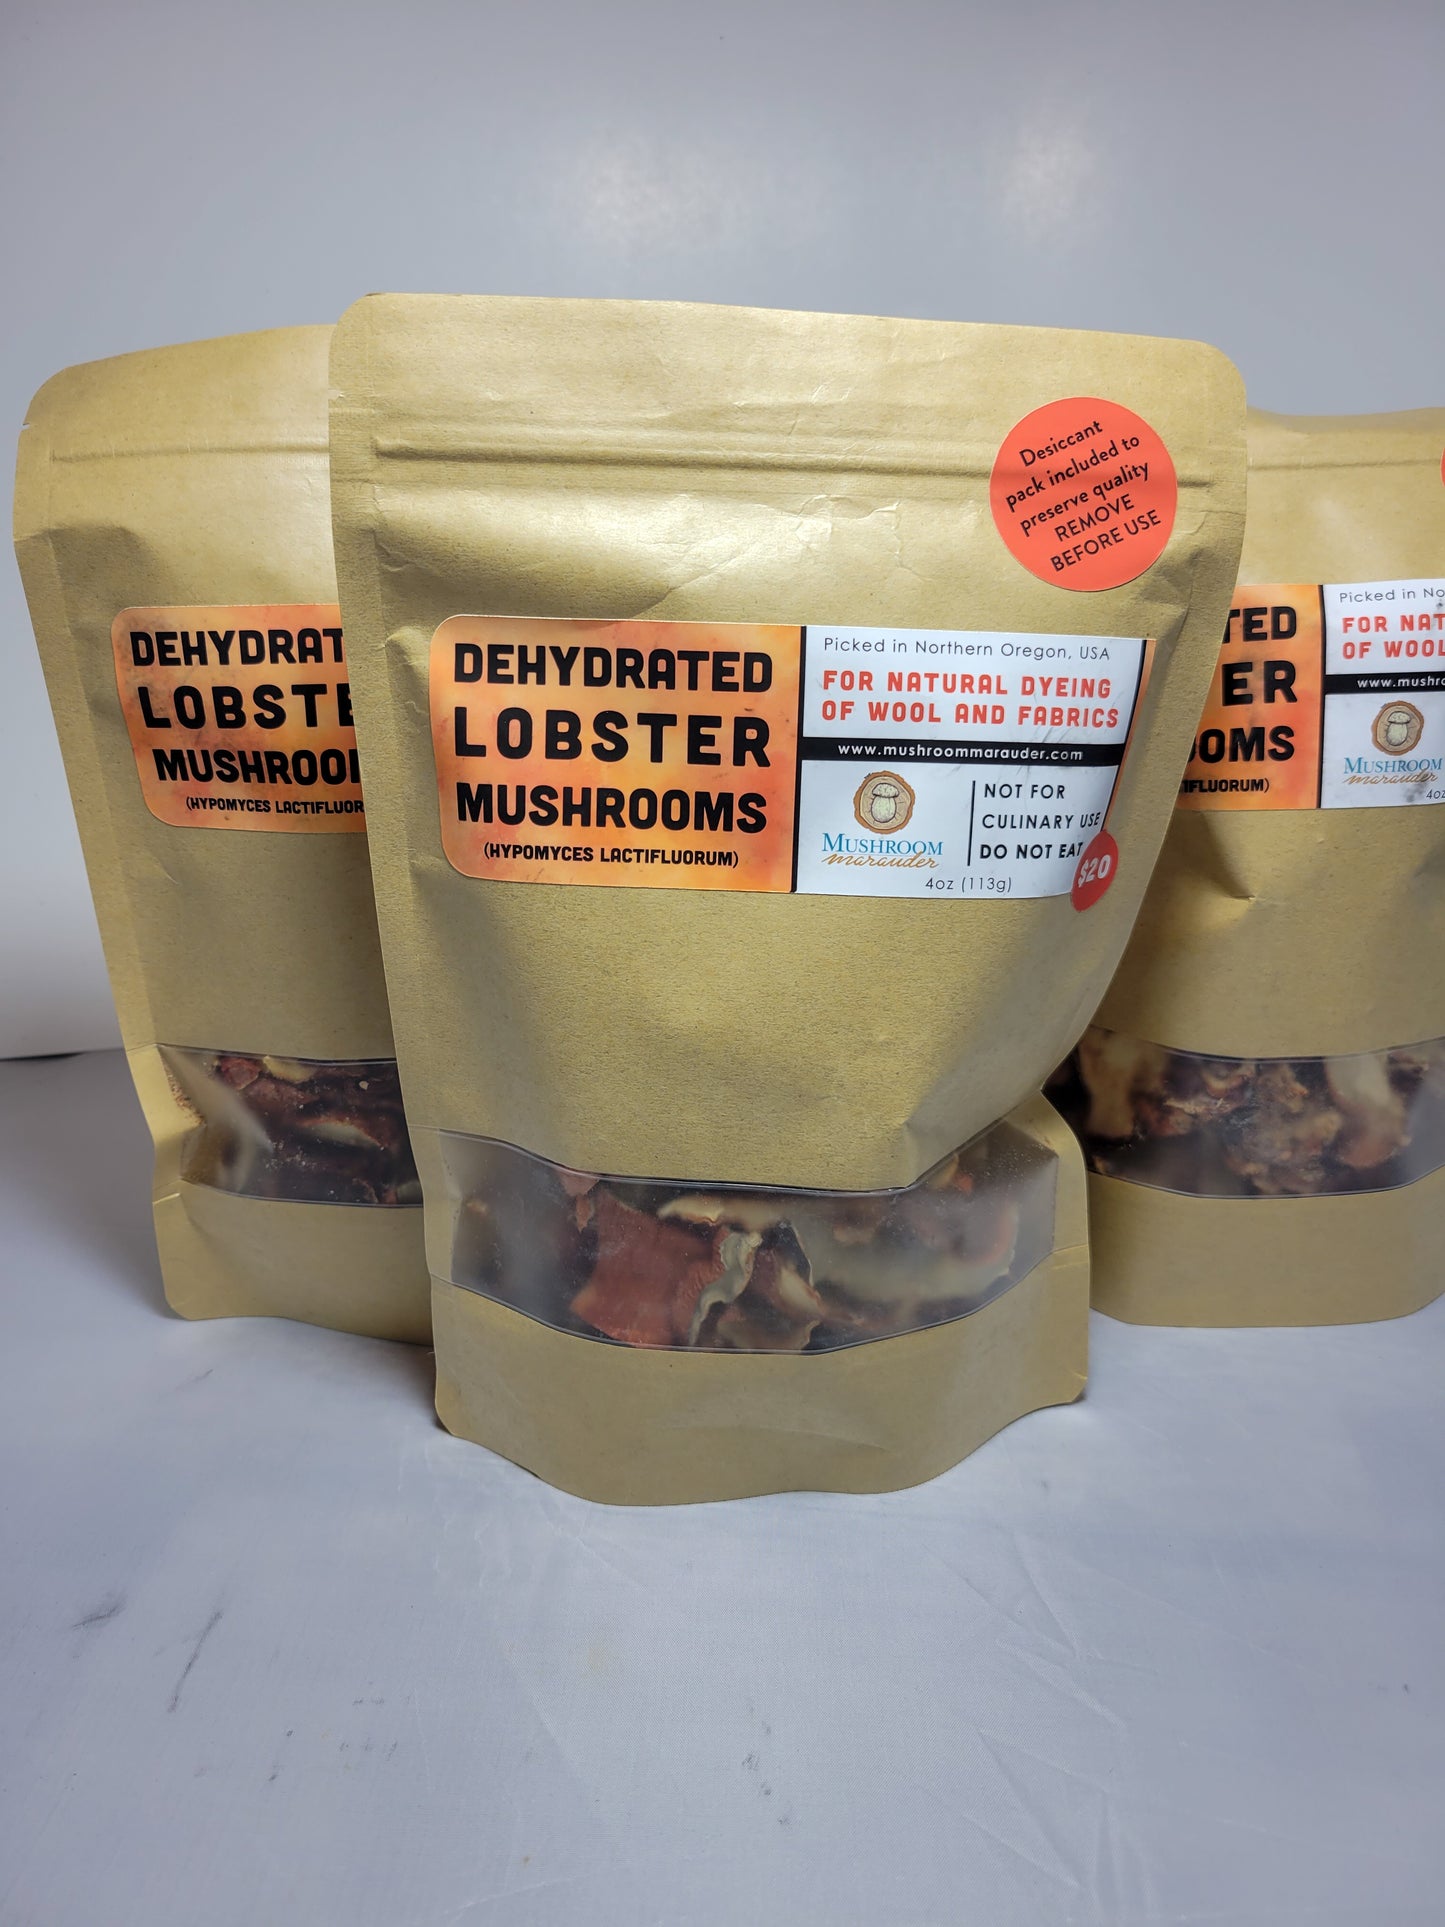 Dehydrated Lobster Mushrooms For Naturally Dyeing Wool and Fabrics *NOT FOR CULINARY USE, DO NOT EAT*